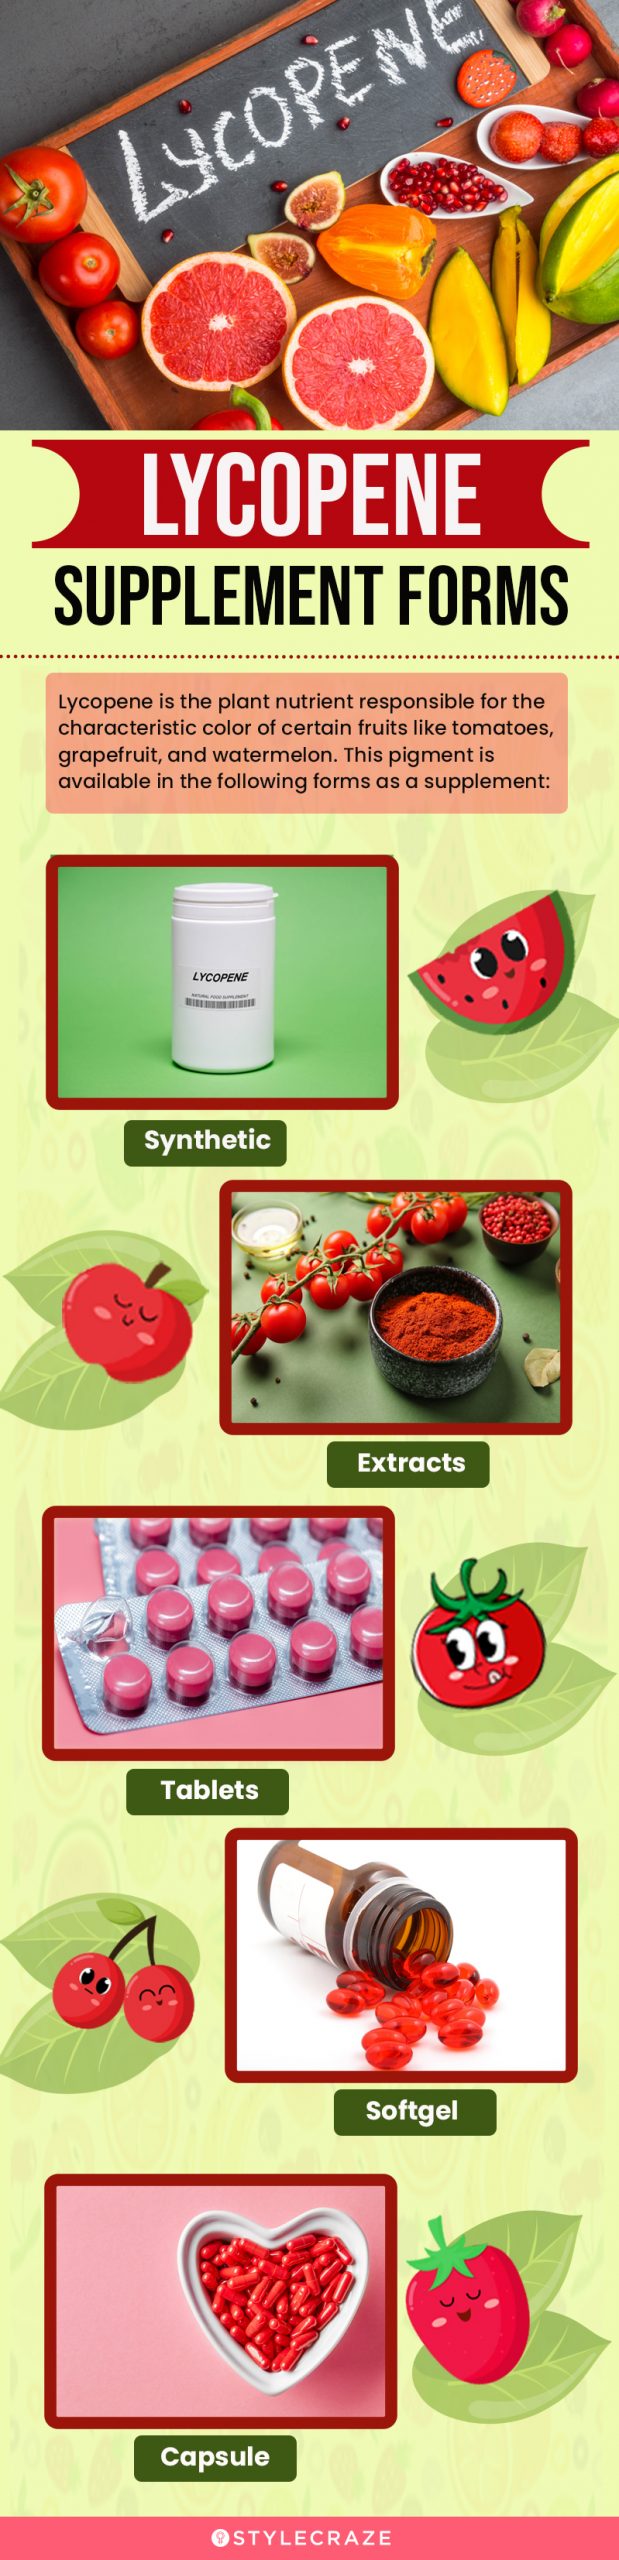 lycopene supplement forms (infographic)